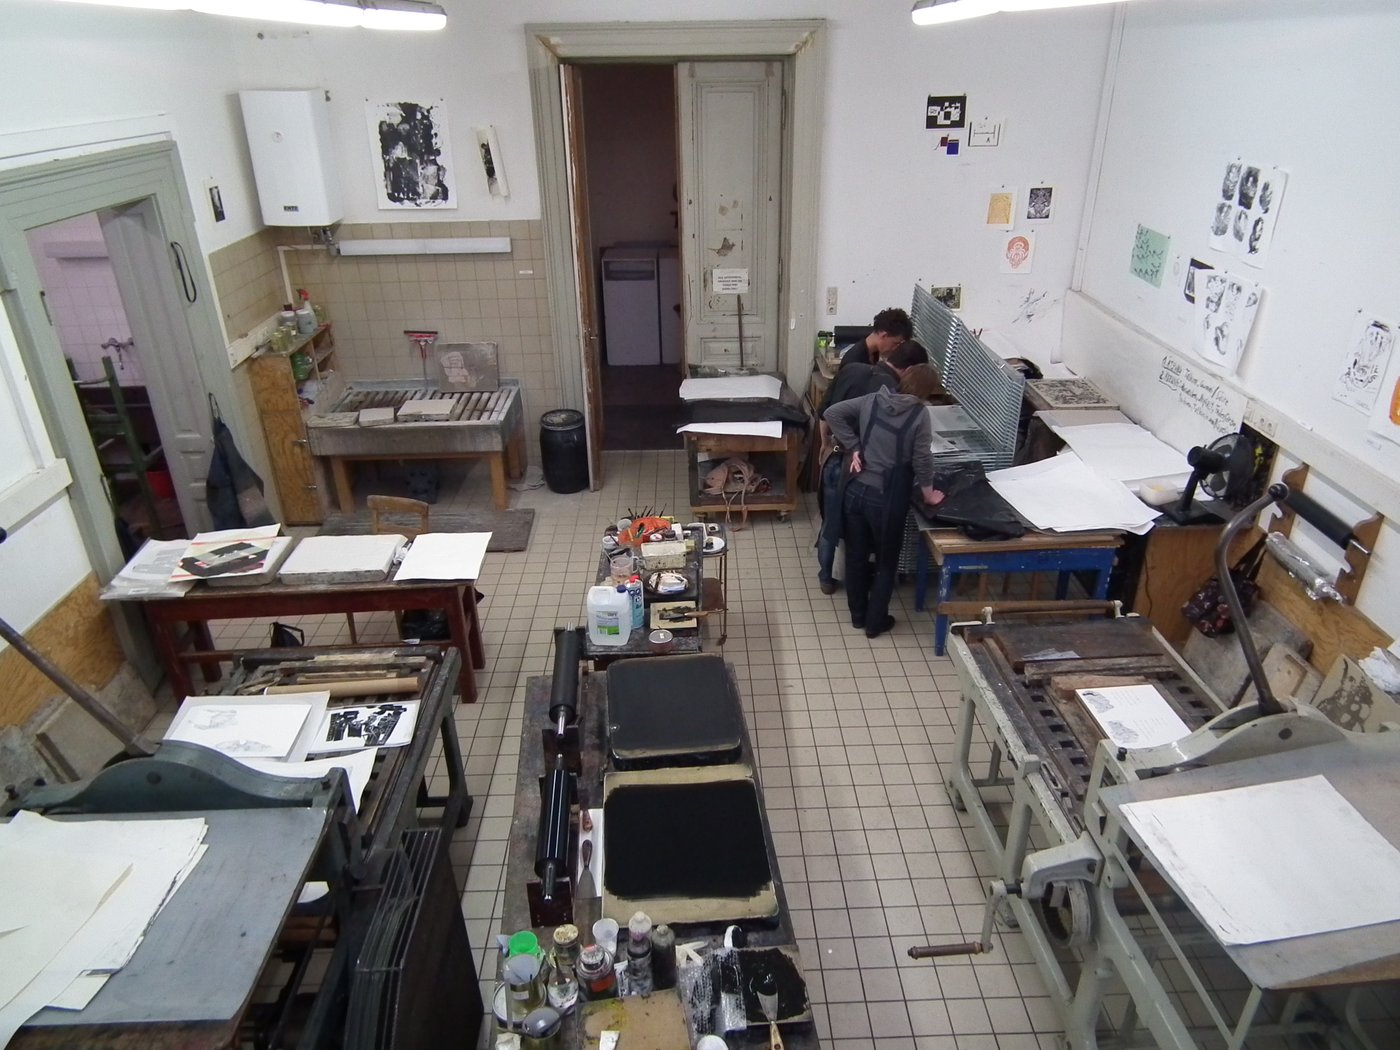 Insight into the print workshop